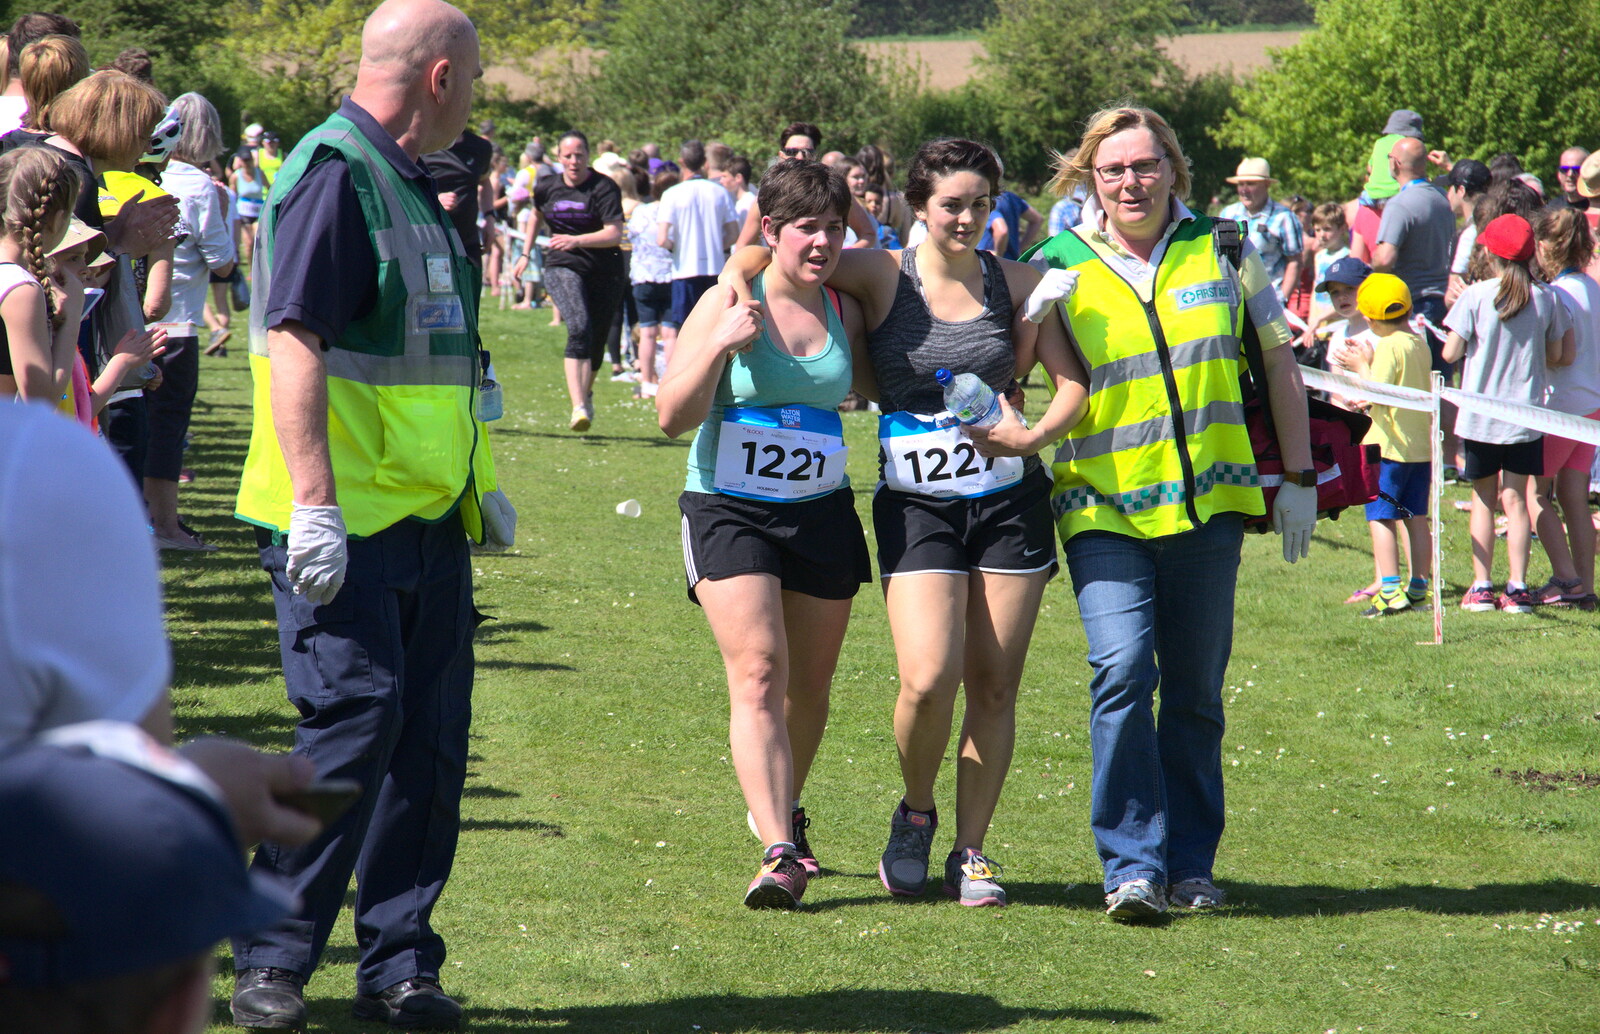 A runner gets a helping hand over the line from Isobel's 10km Run, Alton Water, Stutton, Suffolk - 6th May 2018